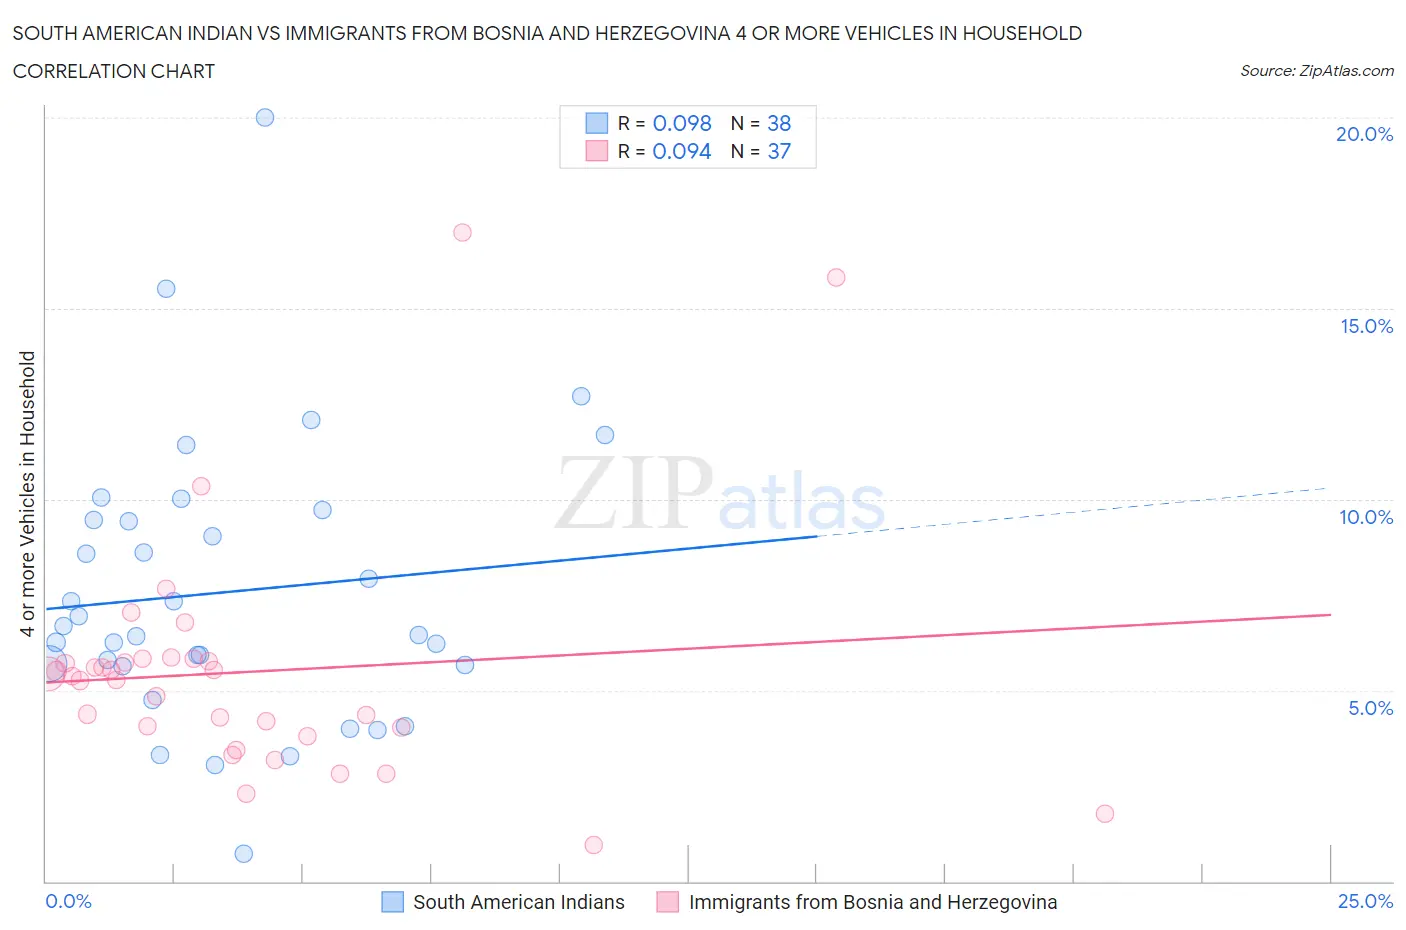 South American Indian vs Immigrants from Bosnia and Herzegovina 4 or more Vehicles in Household